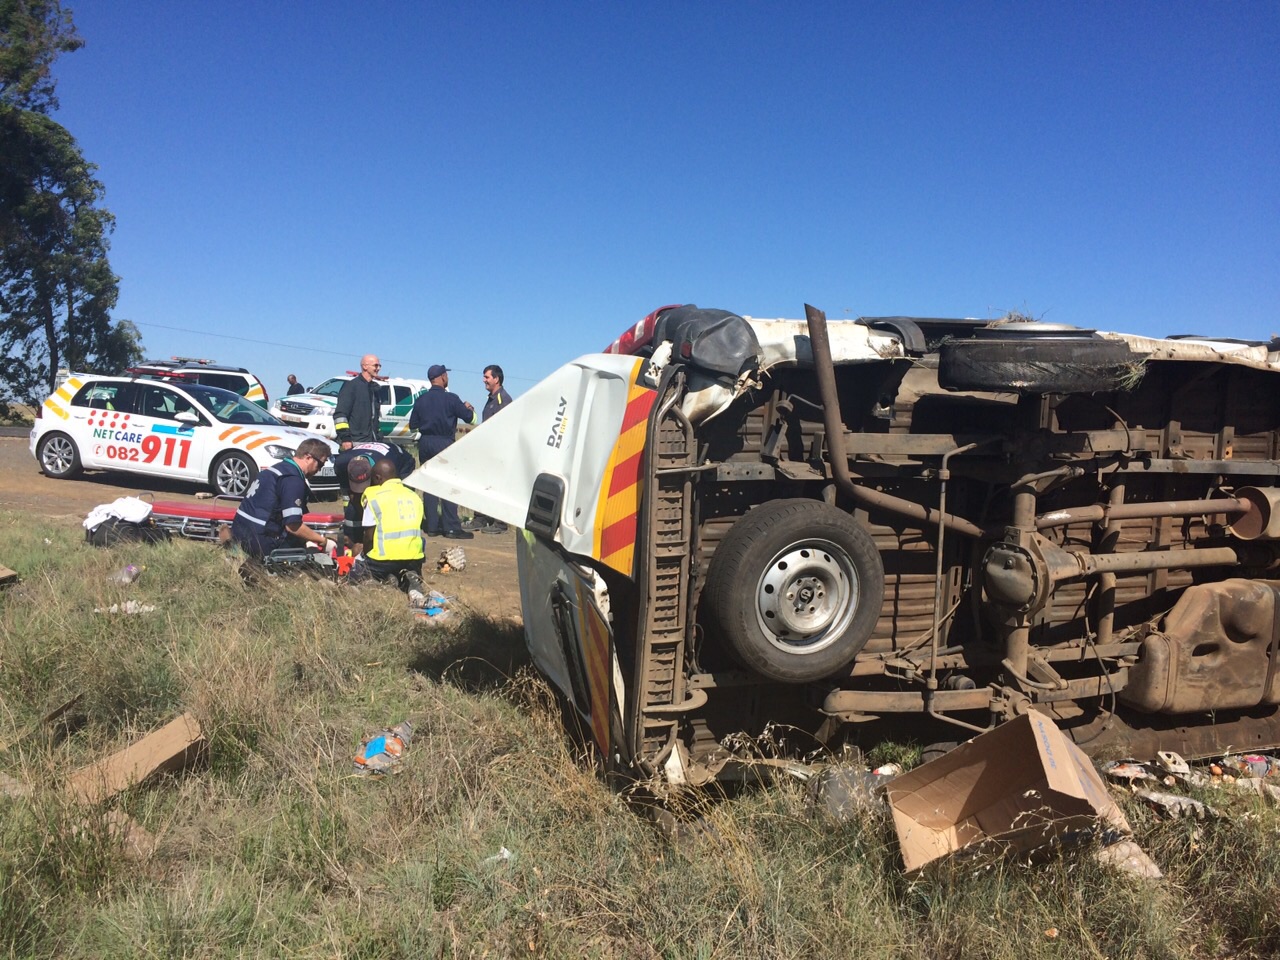 Bloemfontein delivery vehicle rollover leaves two injured